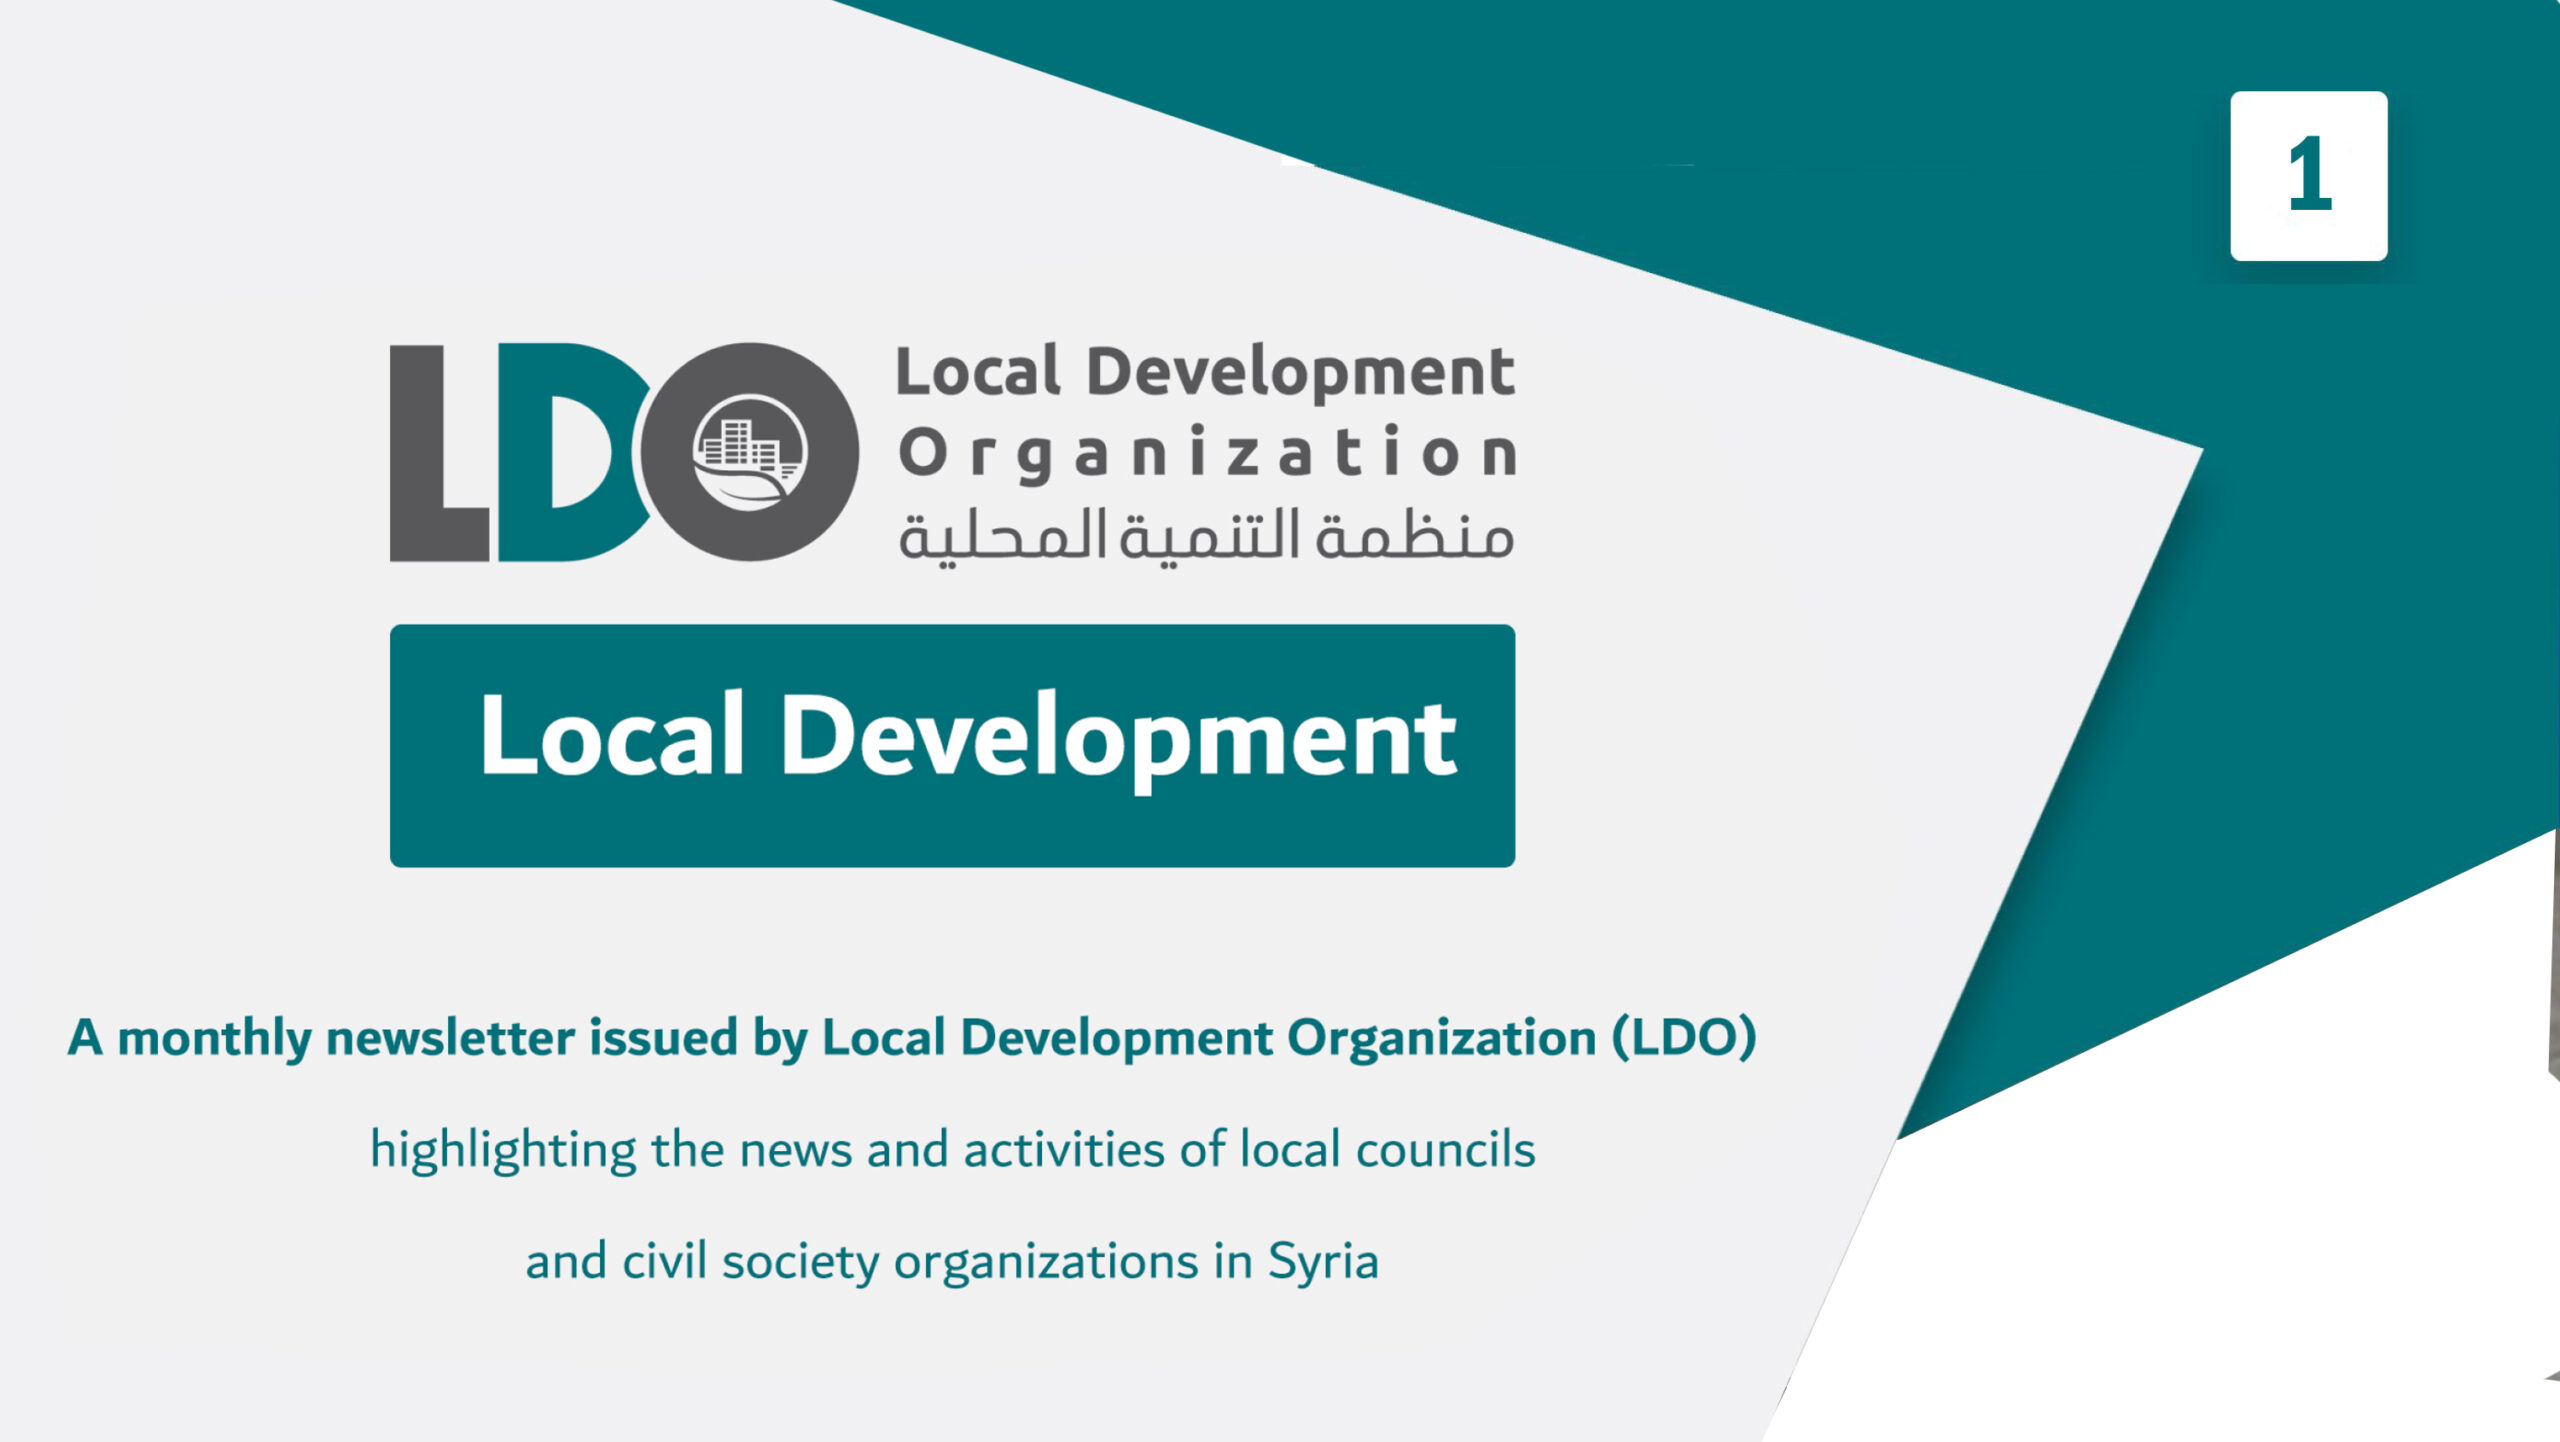 The First issue - Local Development